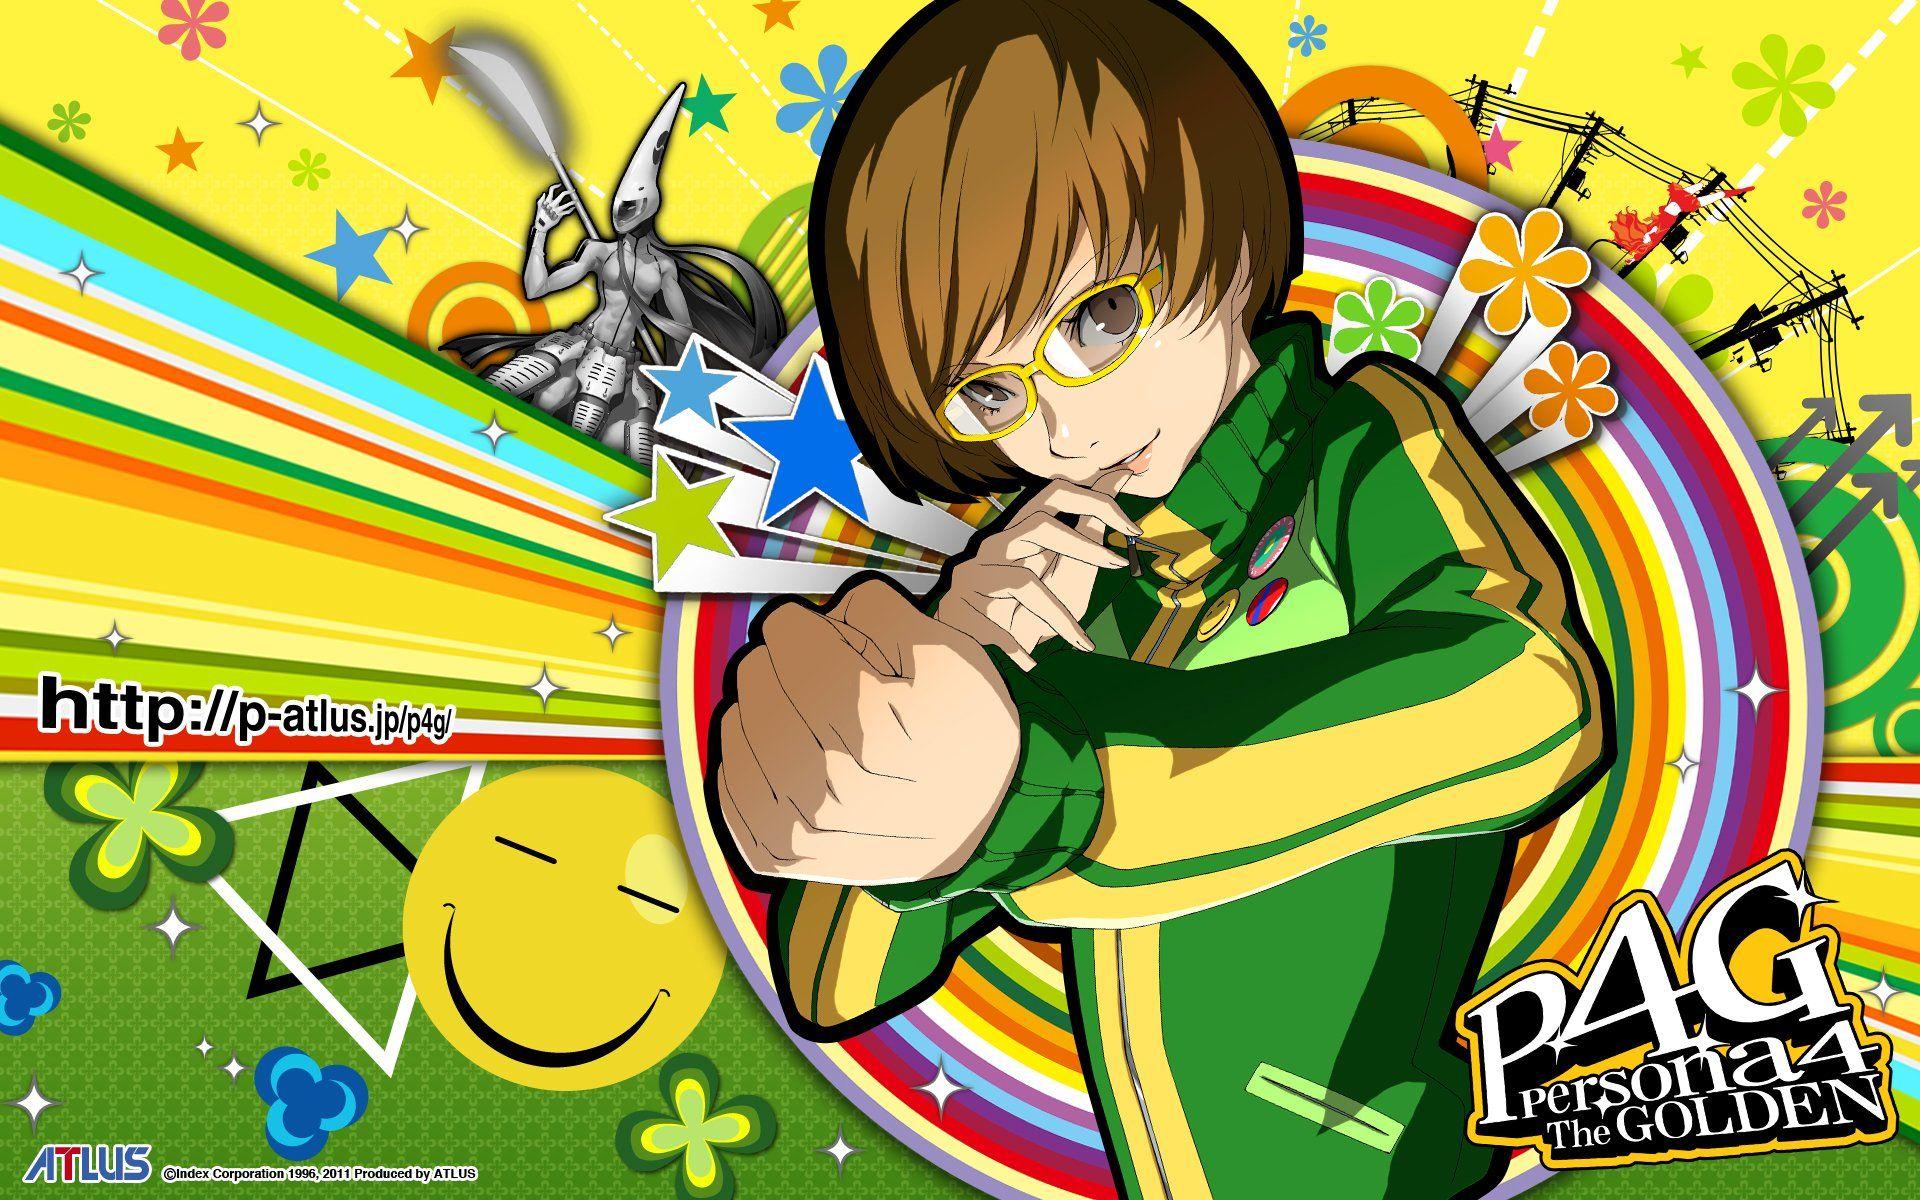 Persona 4 Golden Full HD Wallpaper and Background Imagex1200